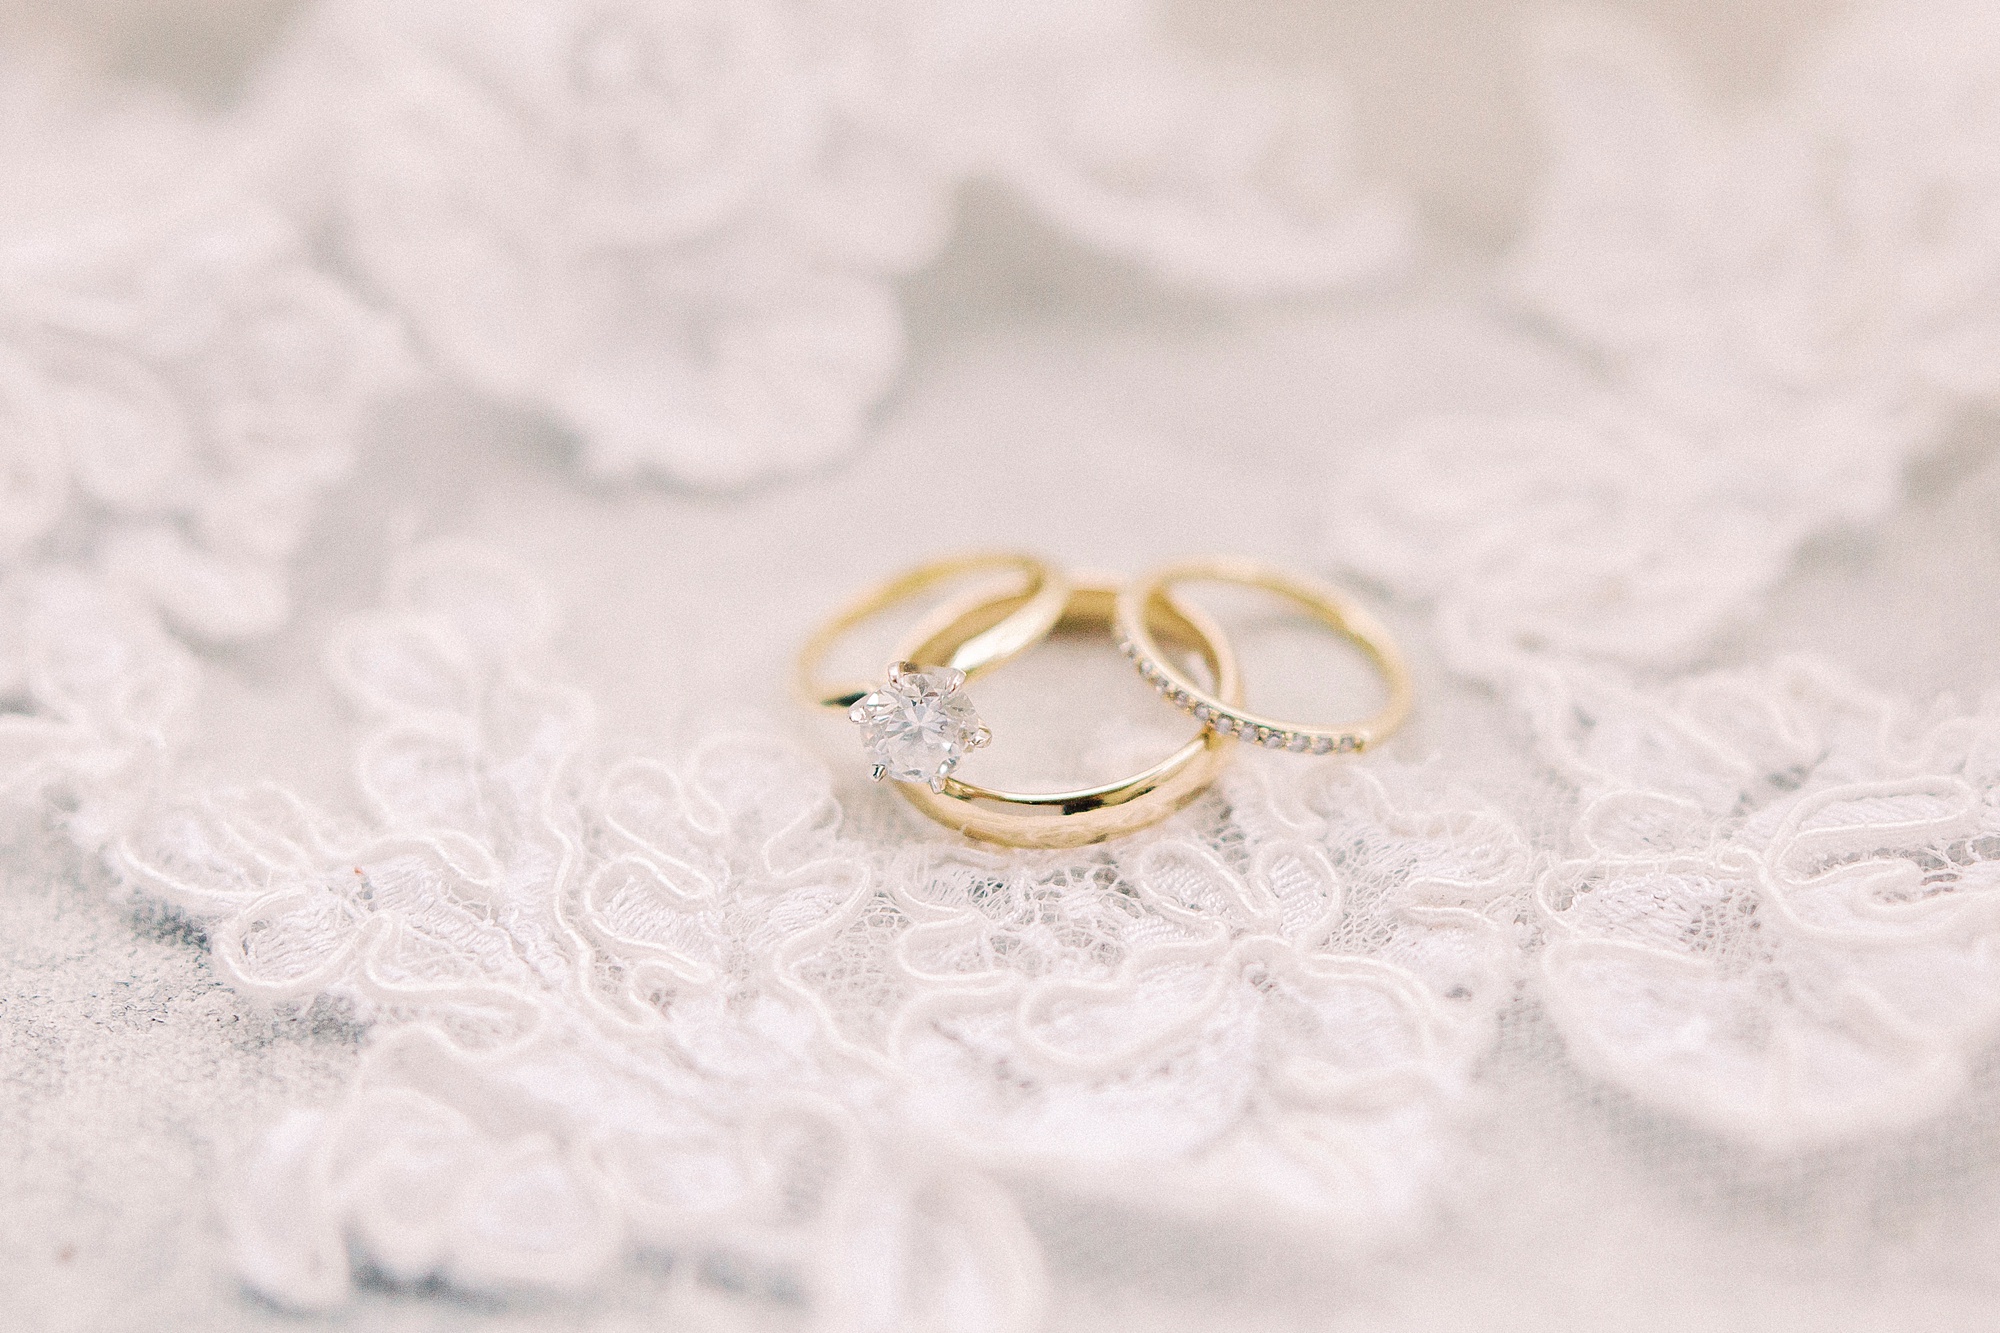 gold wedding bands lay on lace of veil